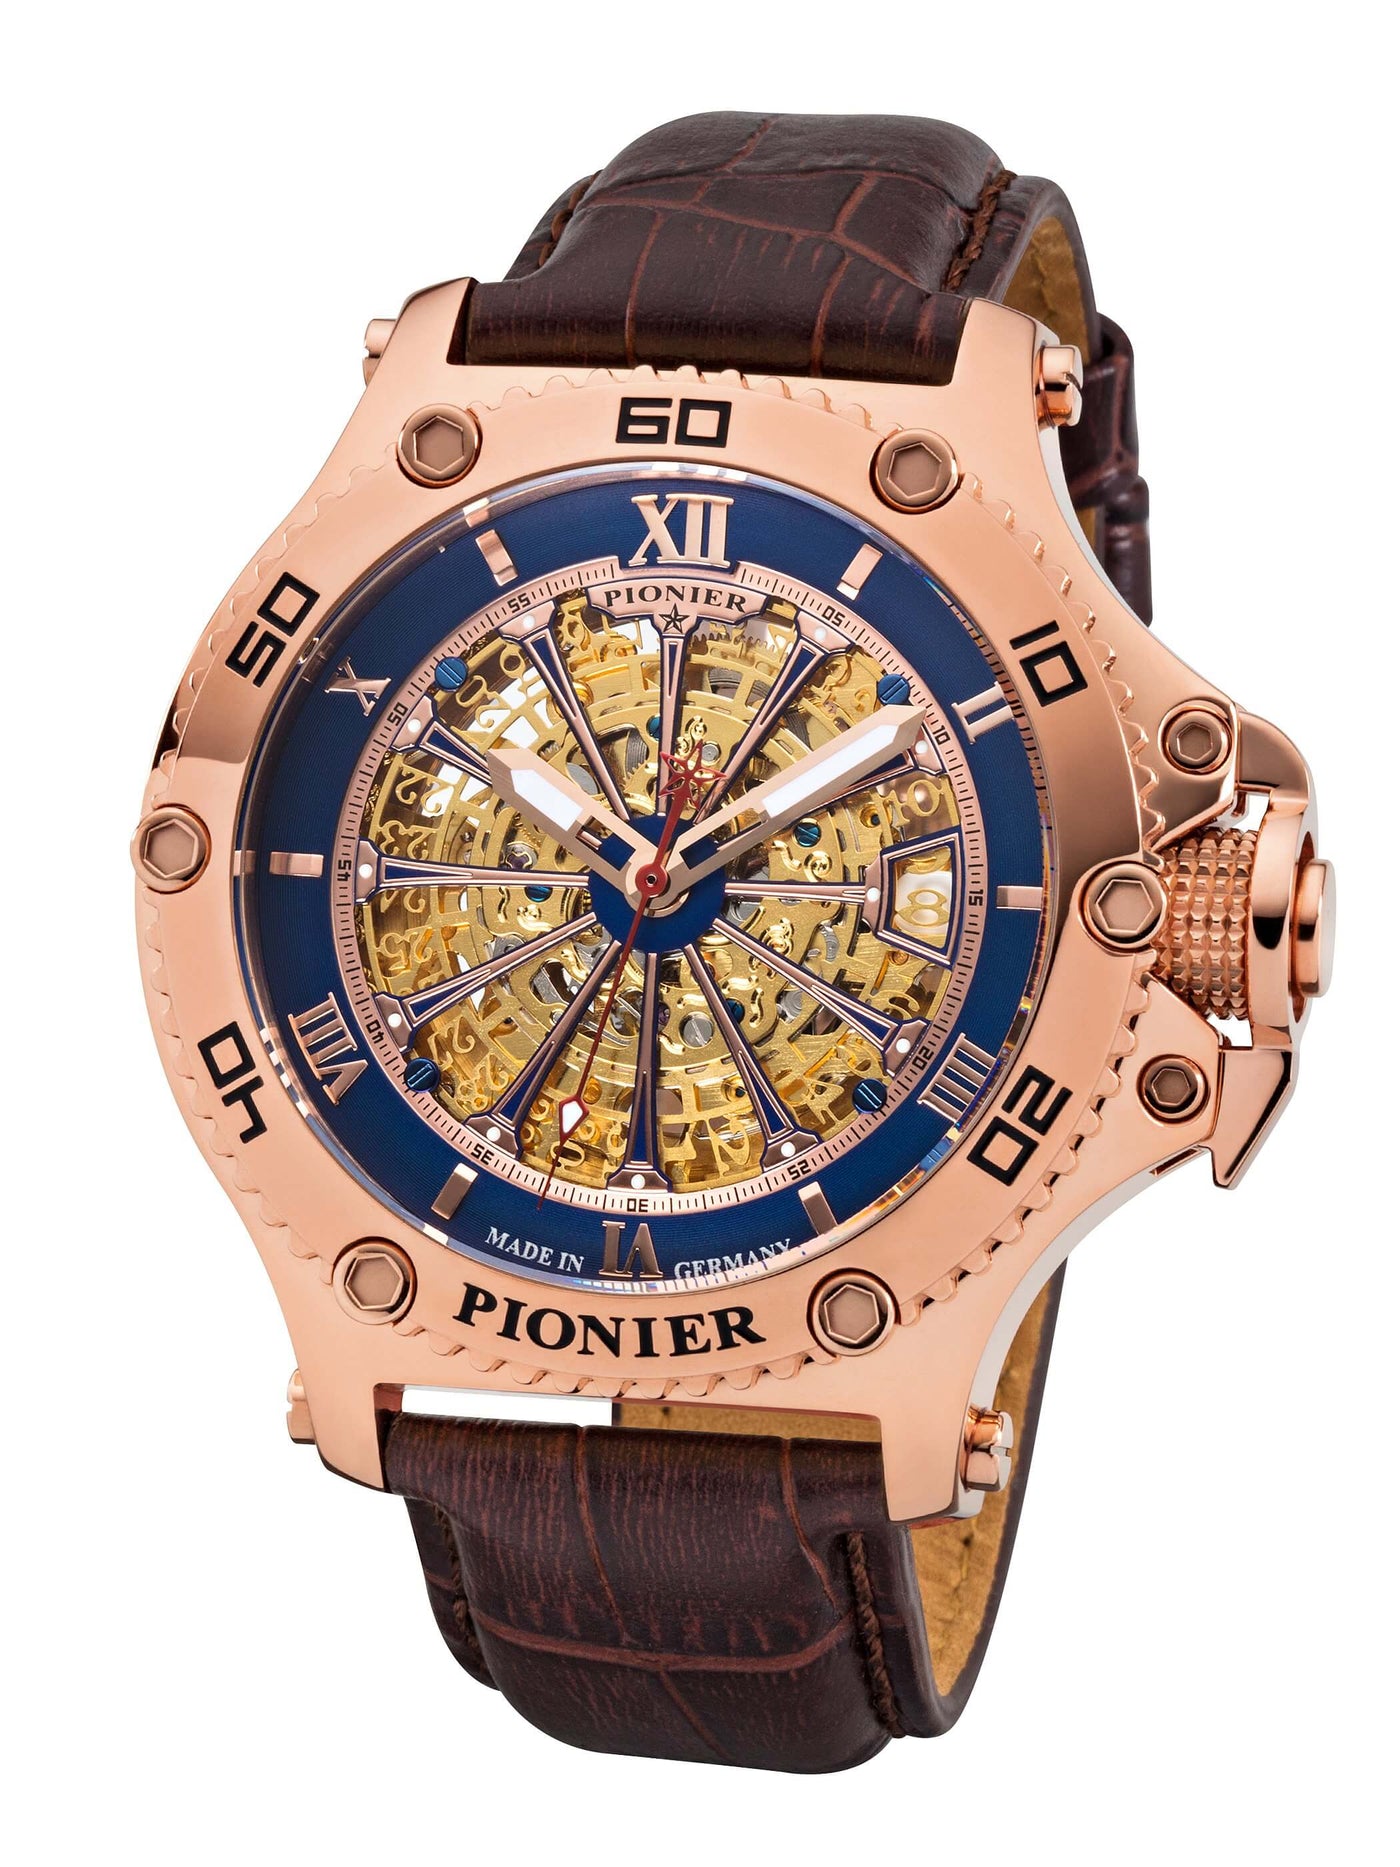 Barcelona Pionier GM-516-6 gold skeleton dial with rose case and brown leather band.